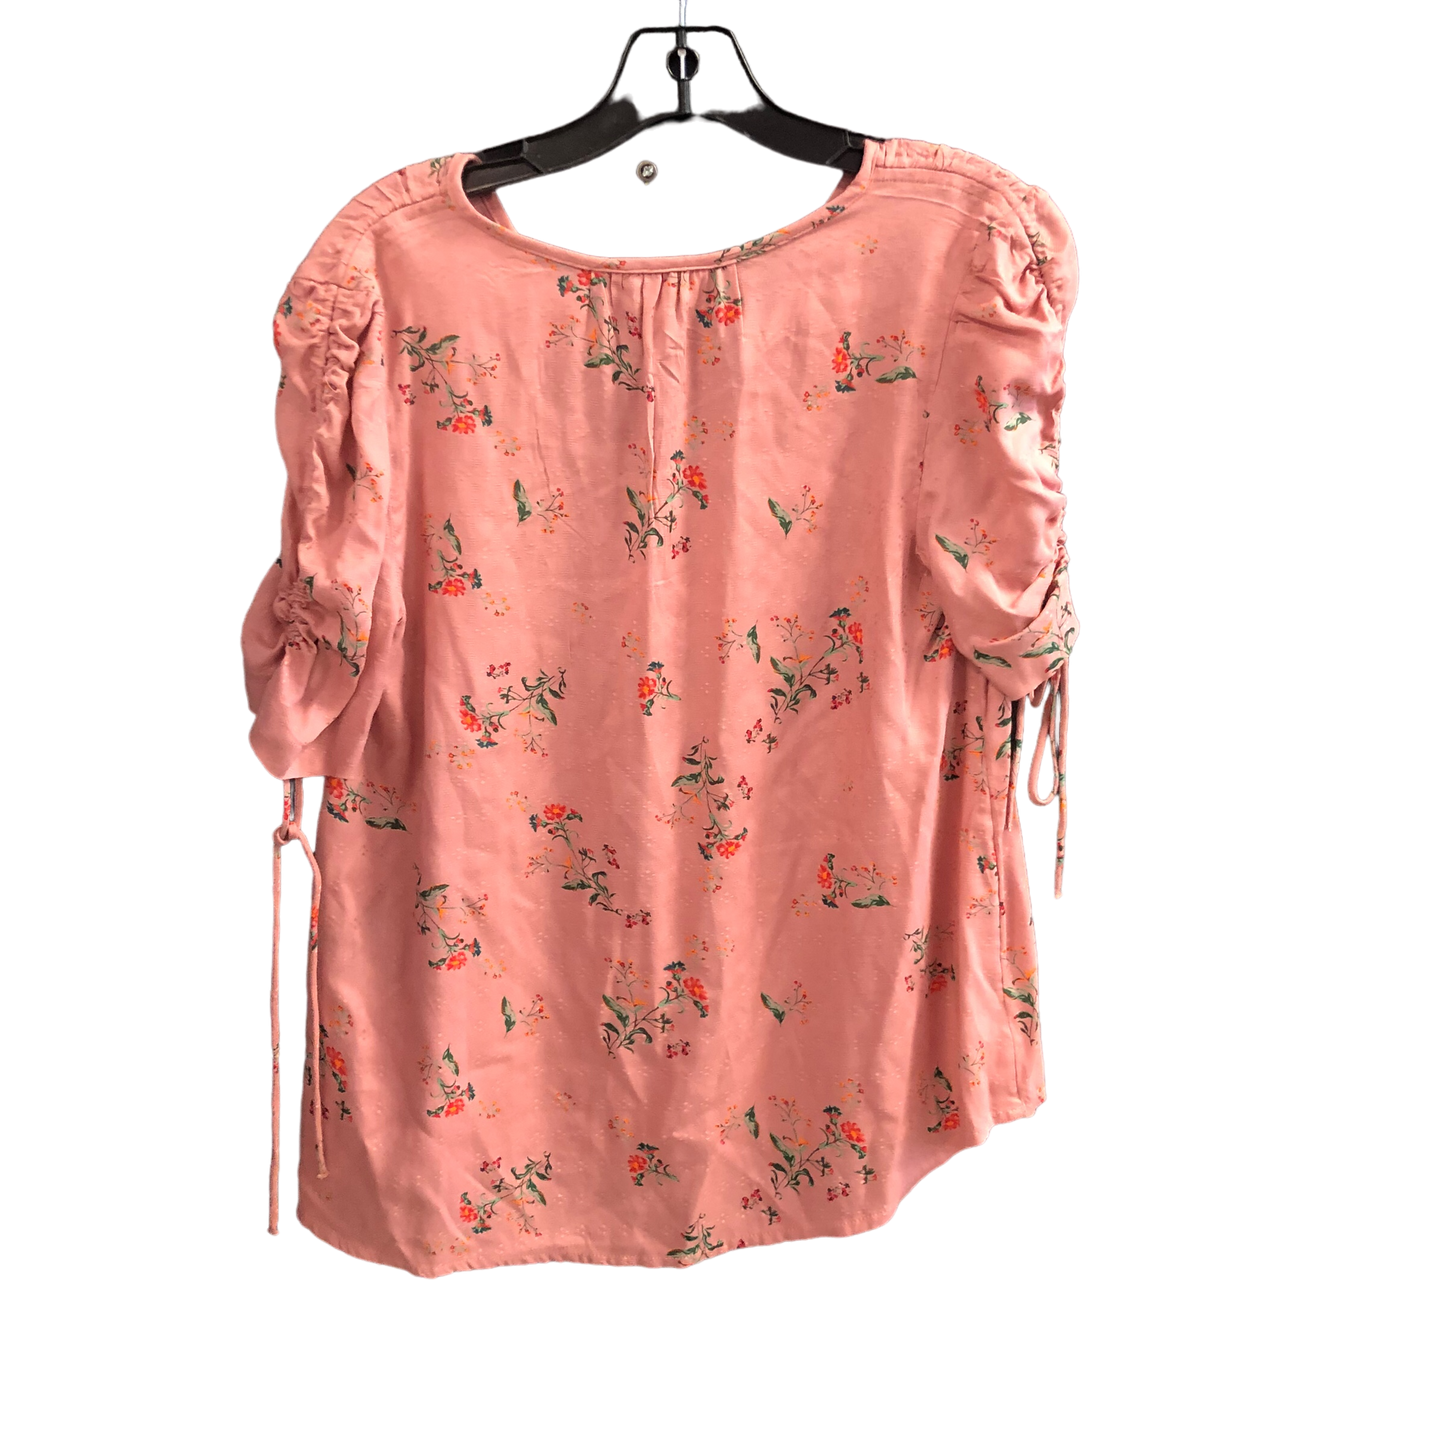 Pink Top Short Sleeve Lucky Brand, Size S